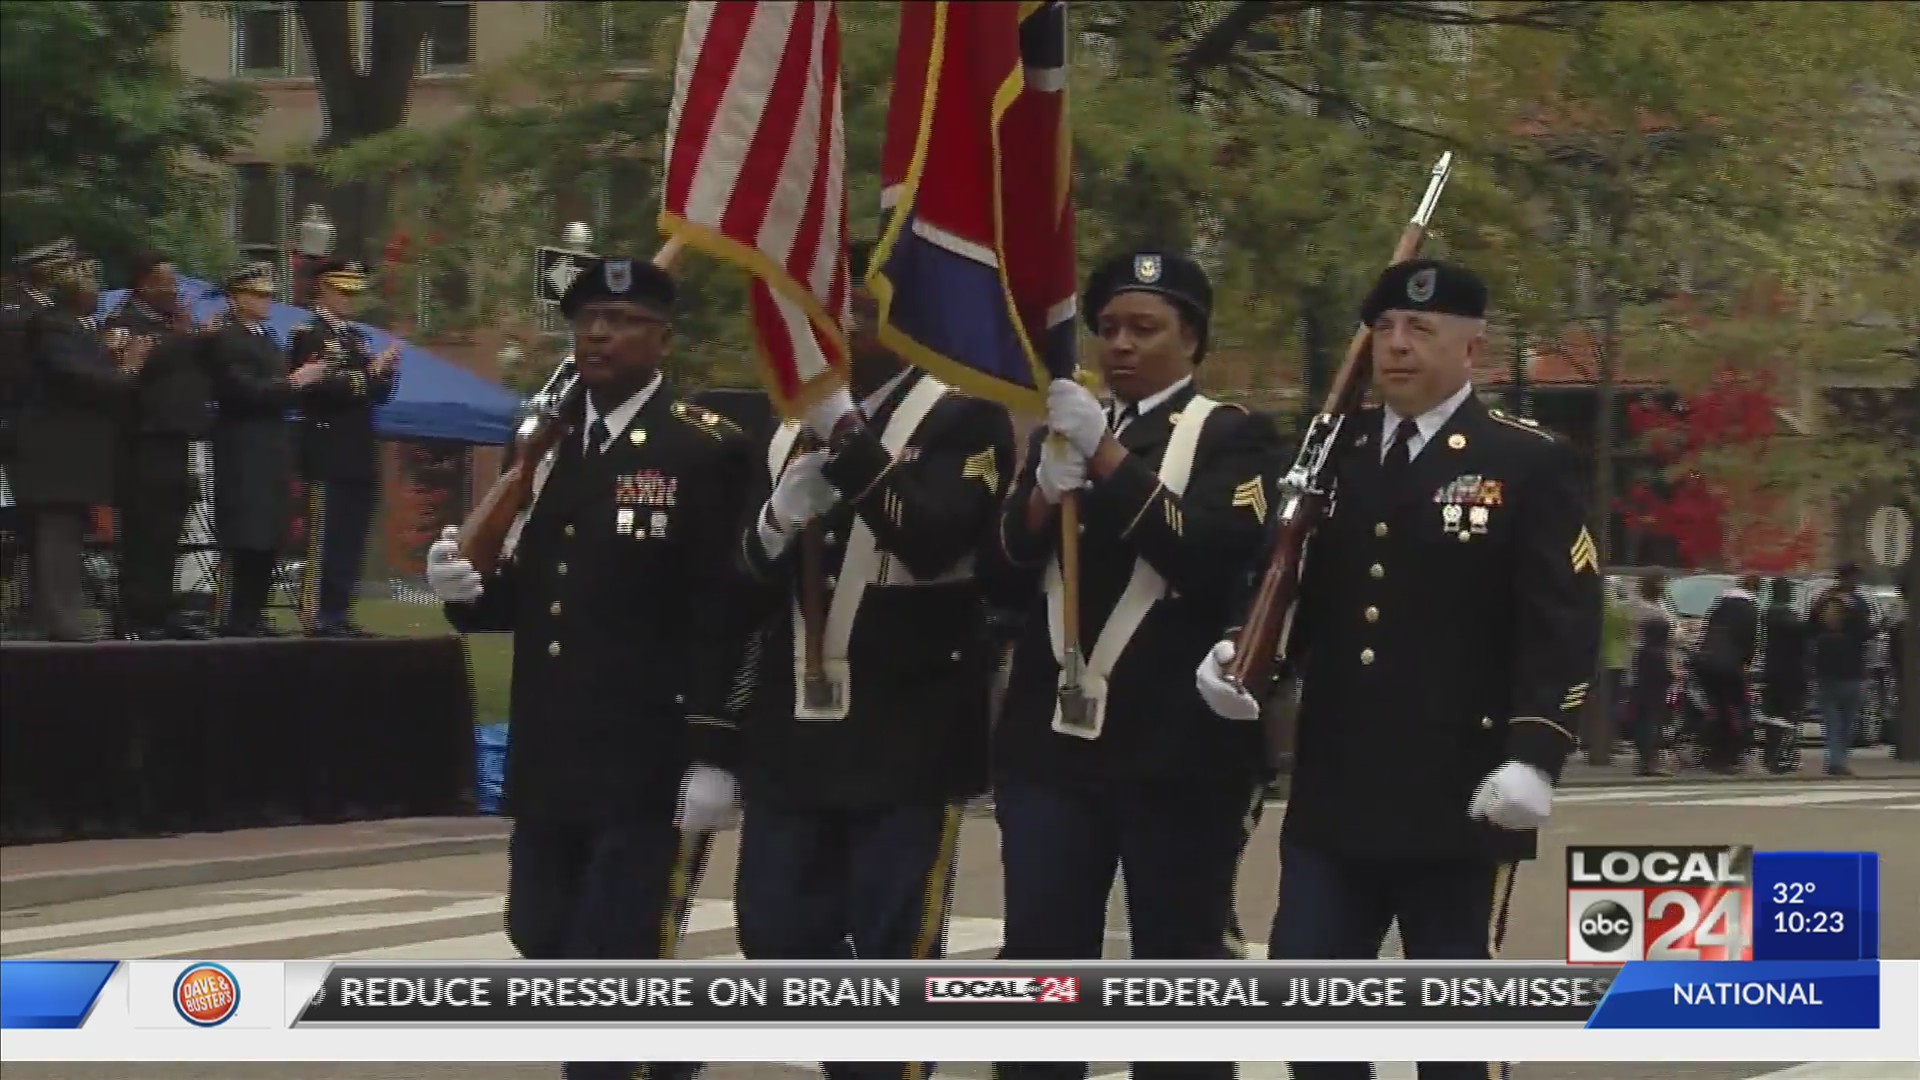 Local 24 News anchor Richard Ransom discusses the importance of honoring our nation's veterans